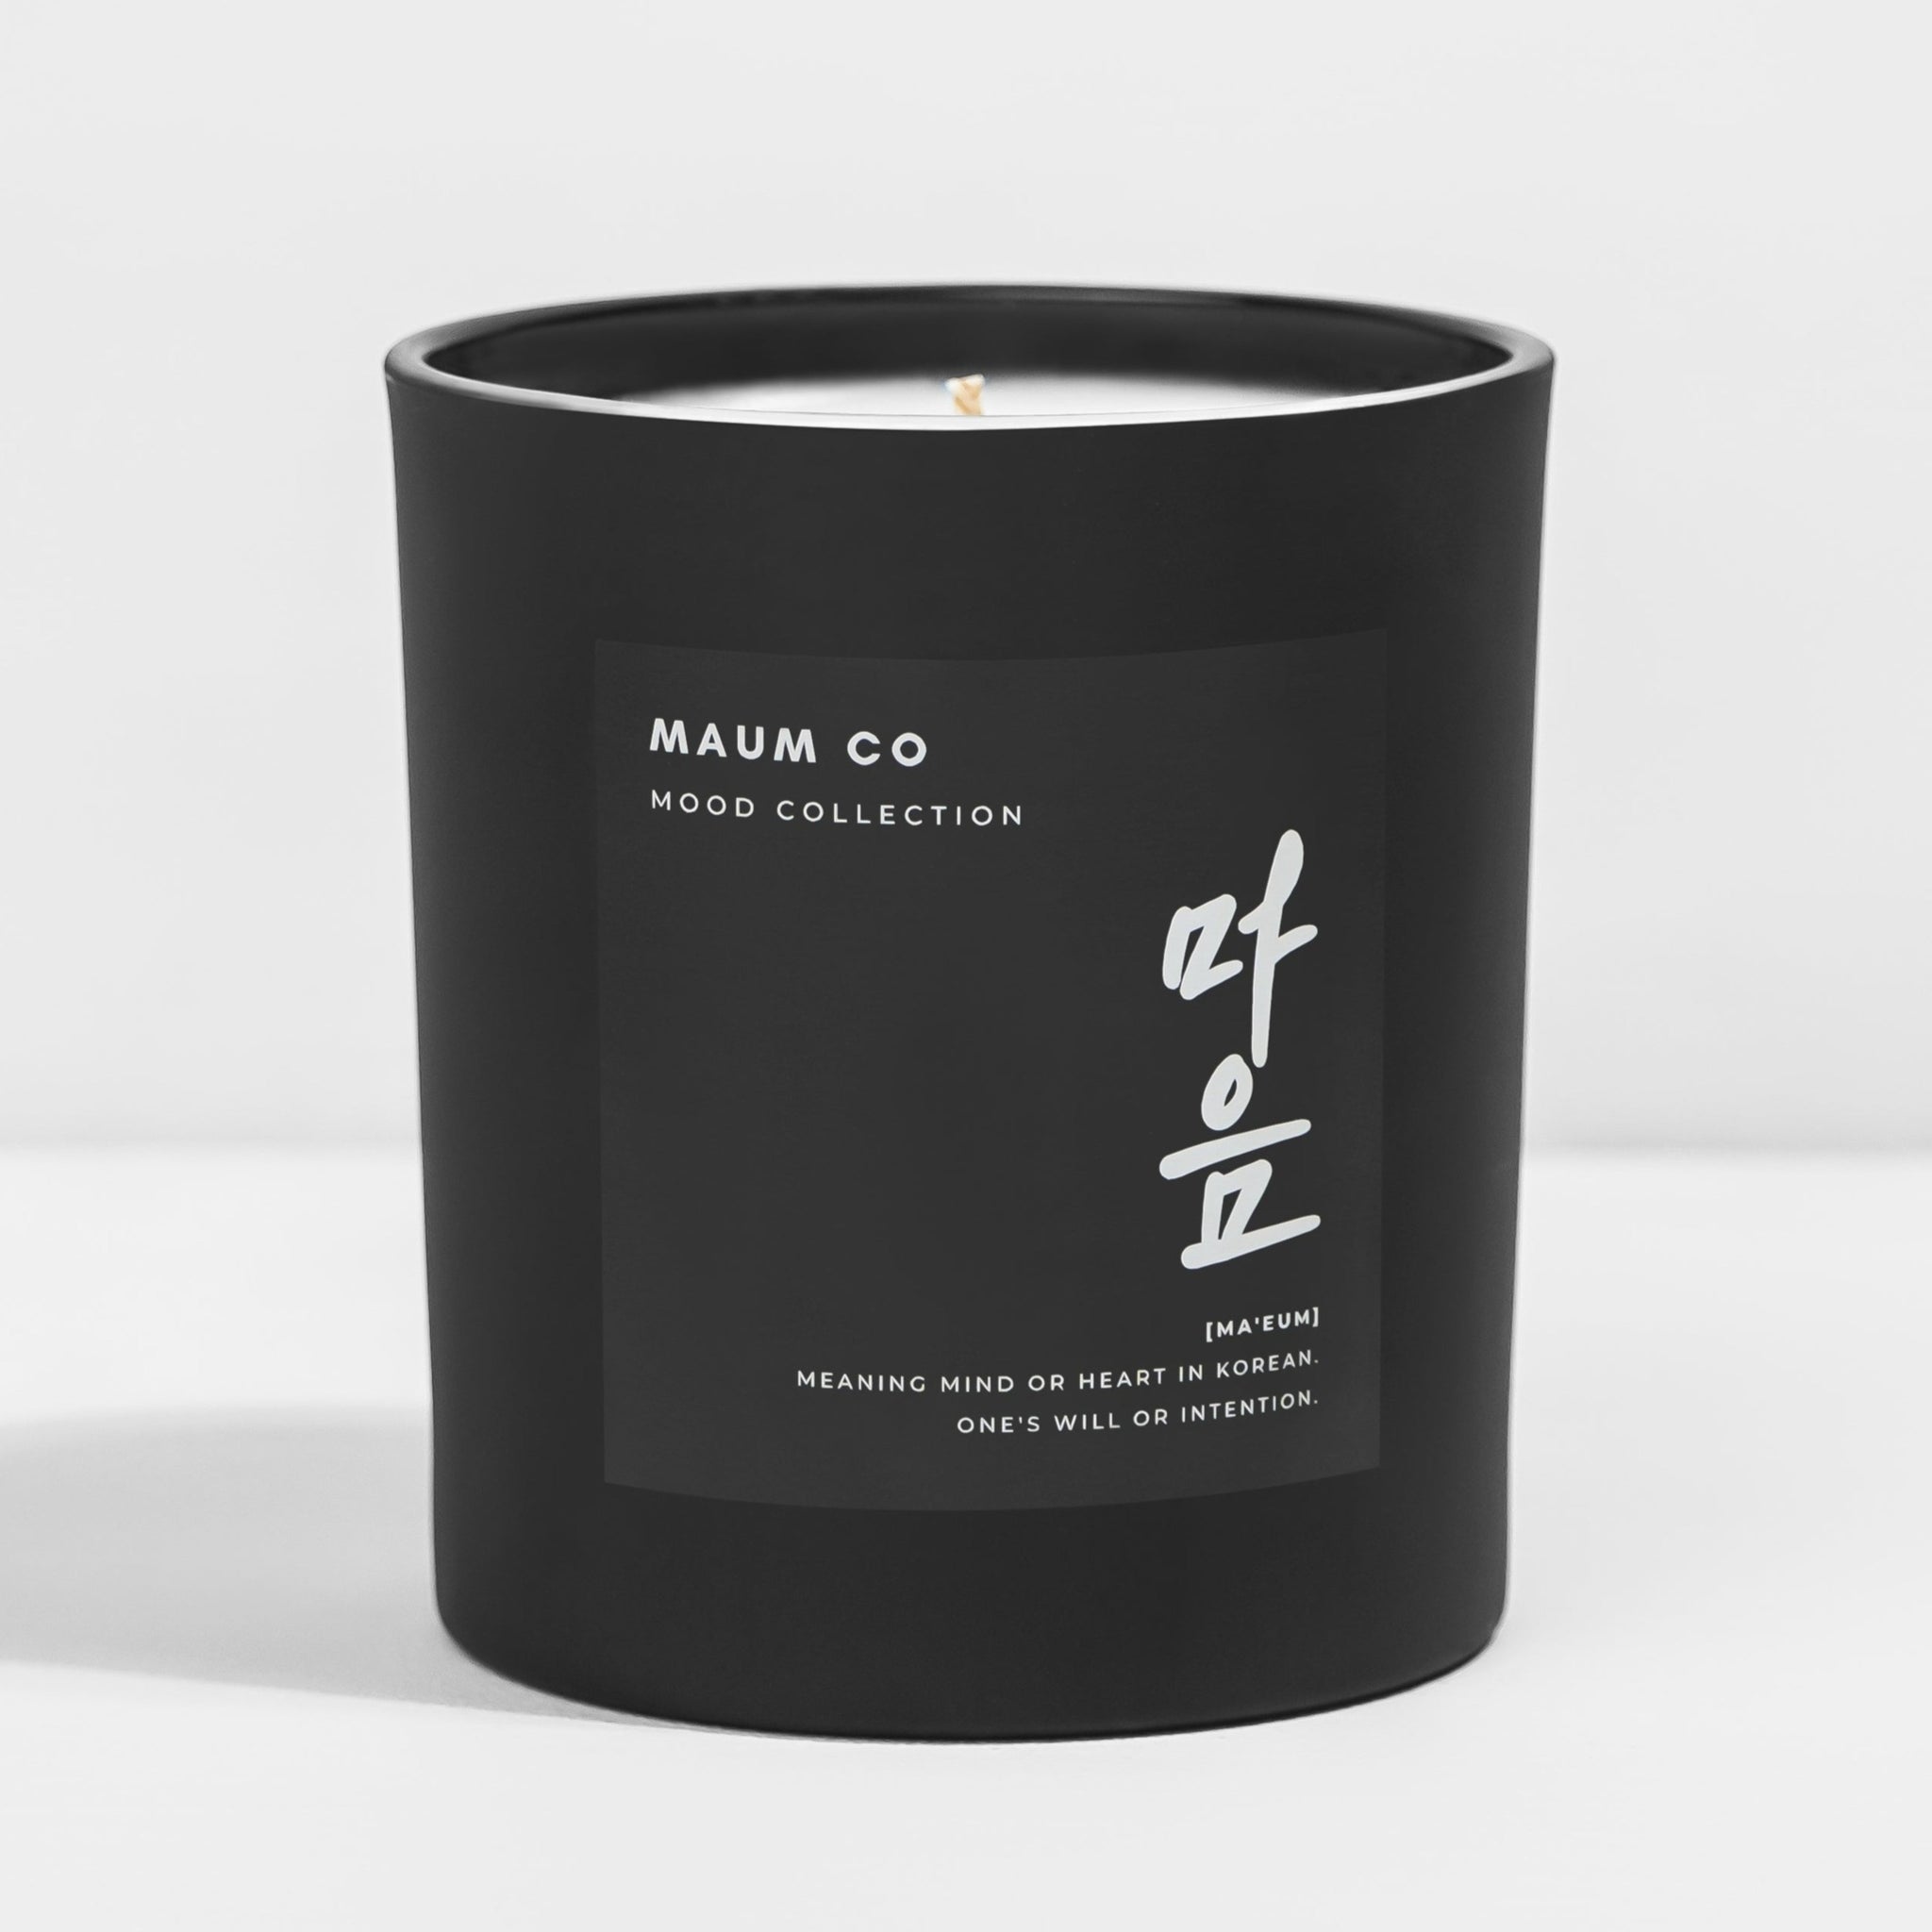 Korean candle meaning heart